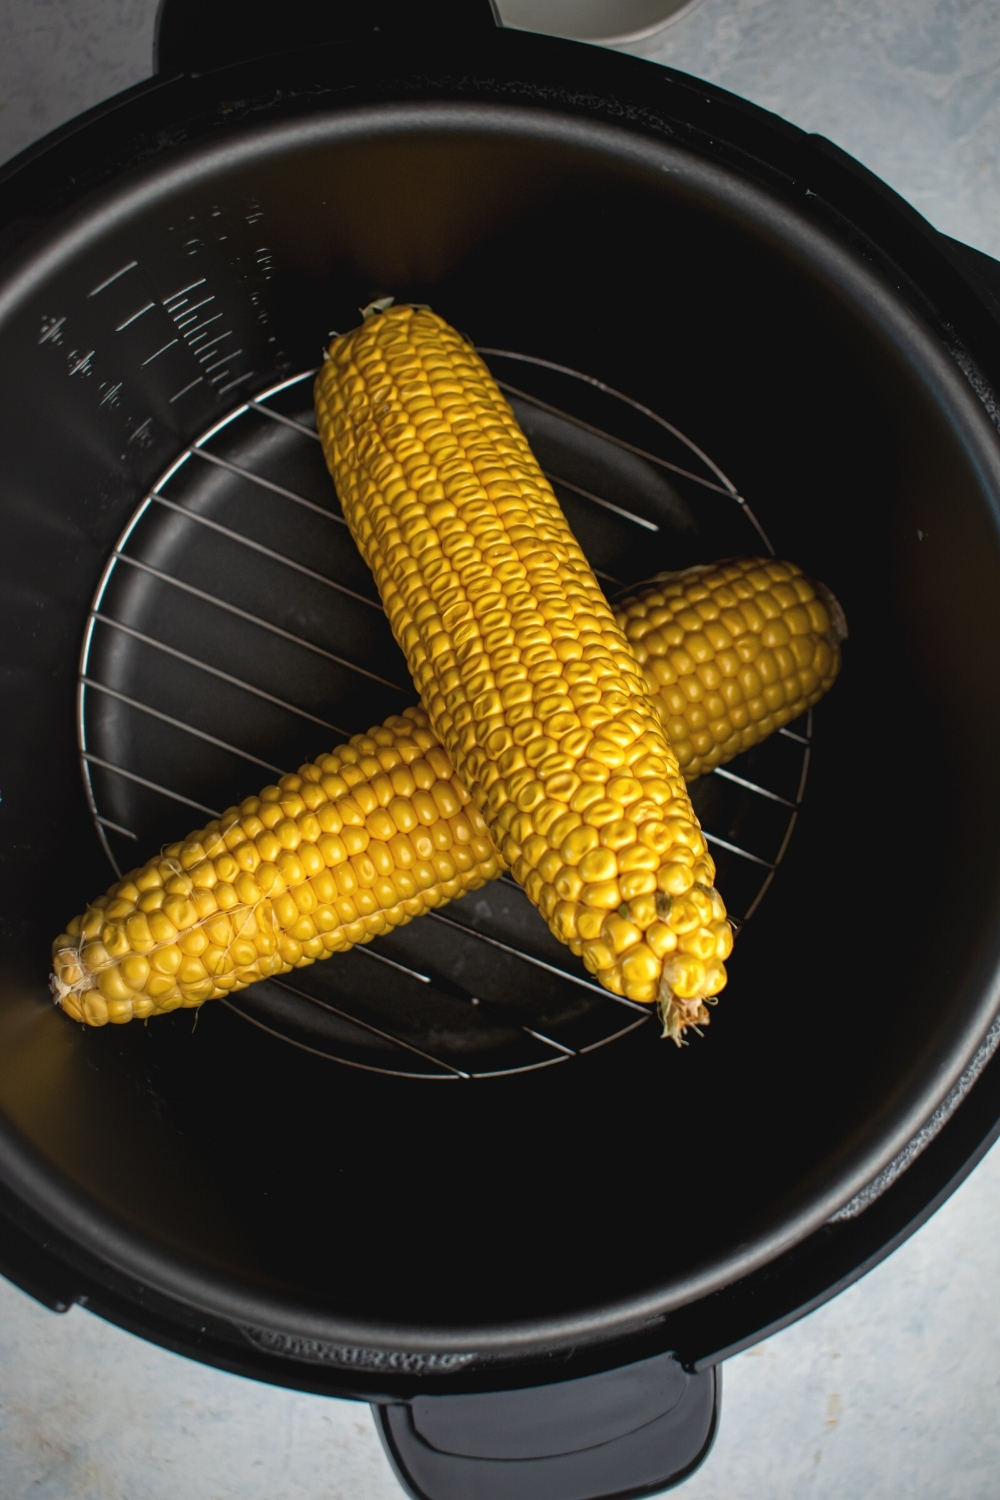 Two corn on the carbs in an instant pot.